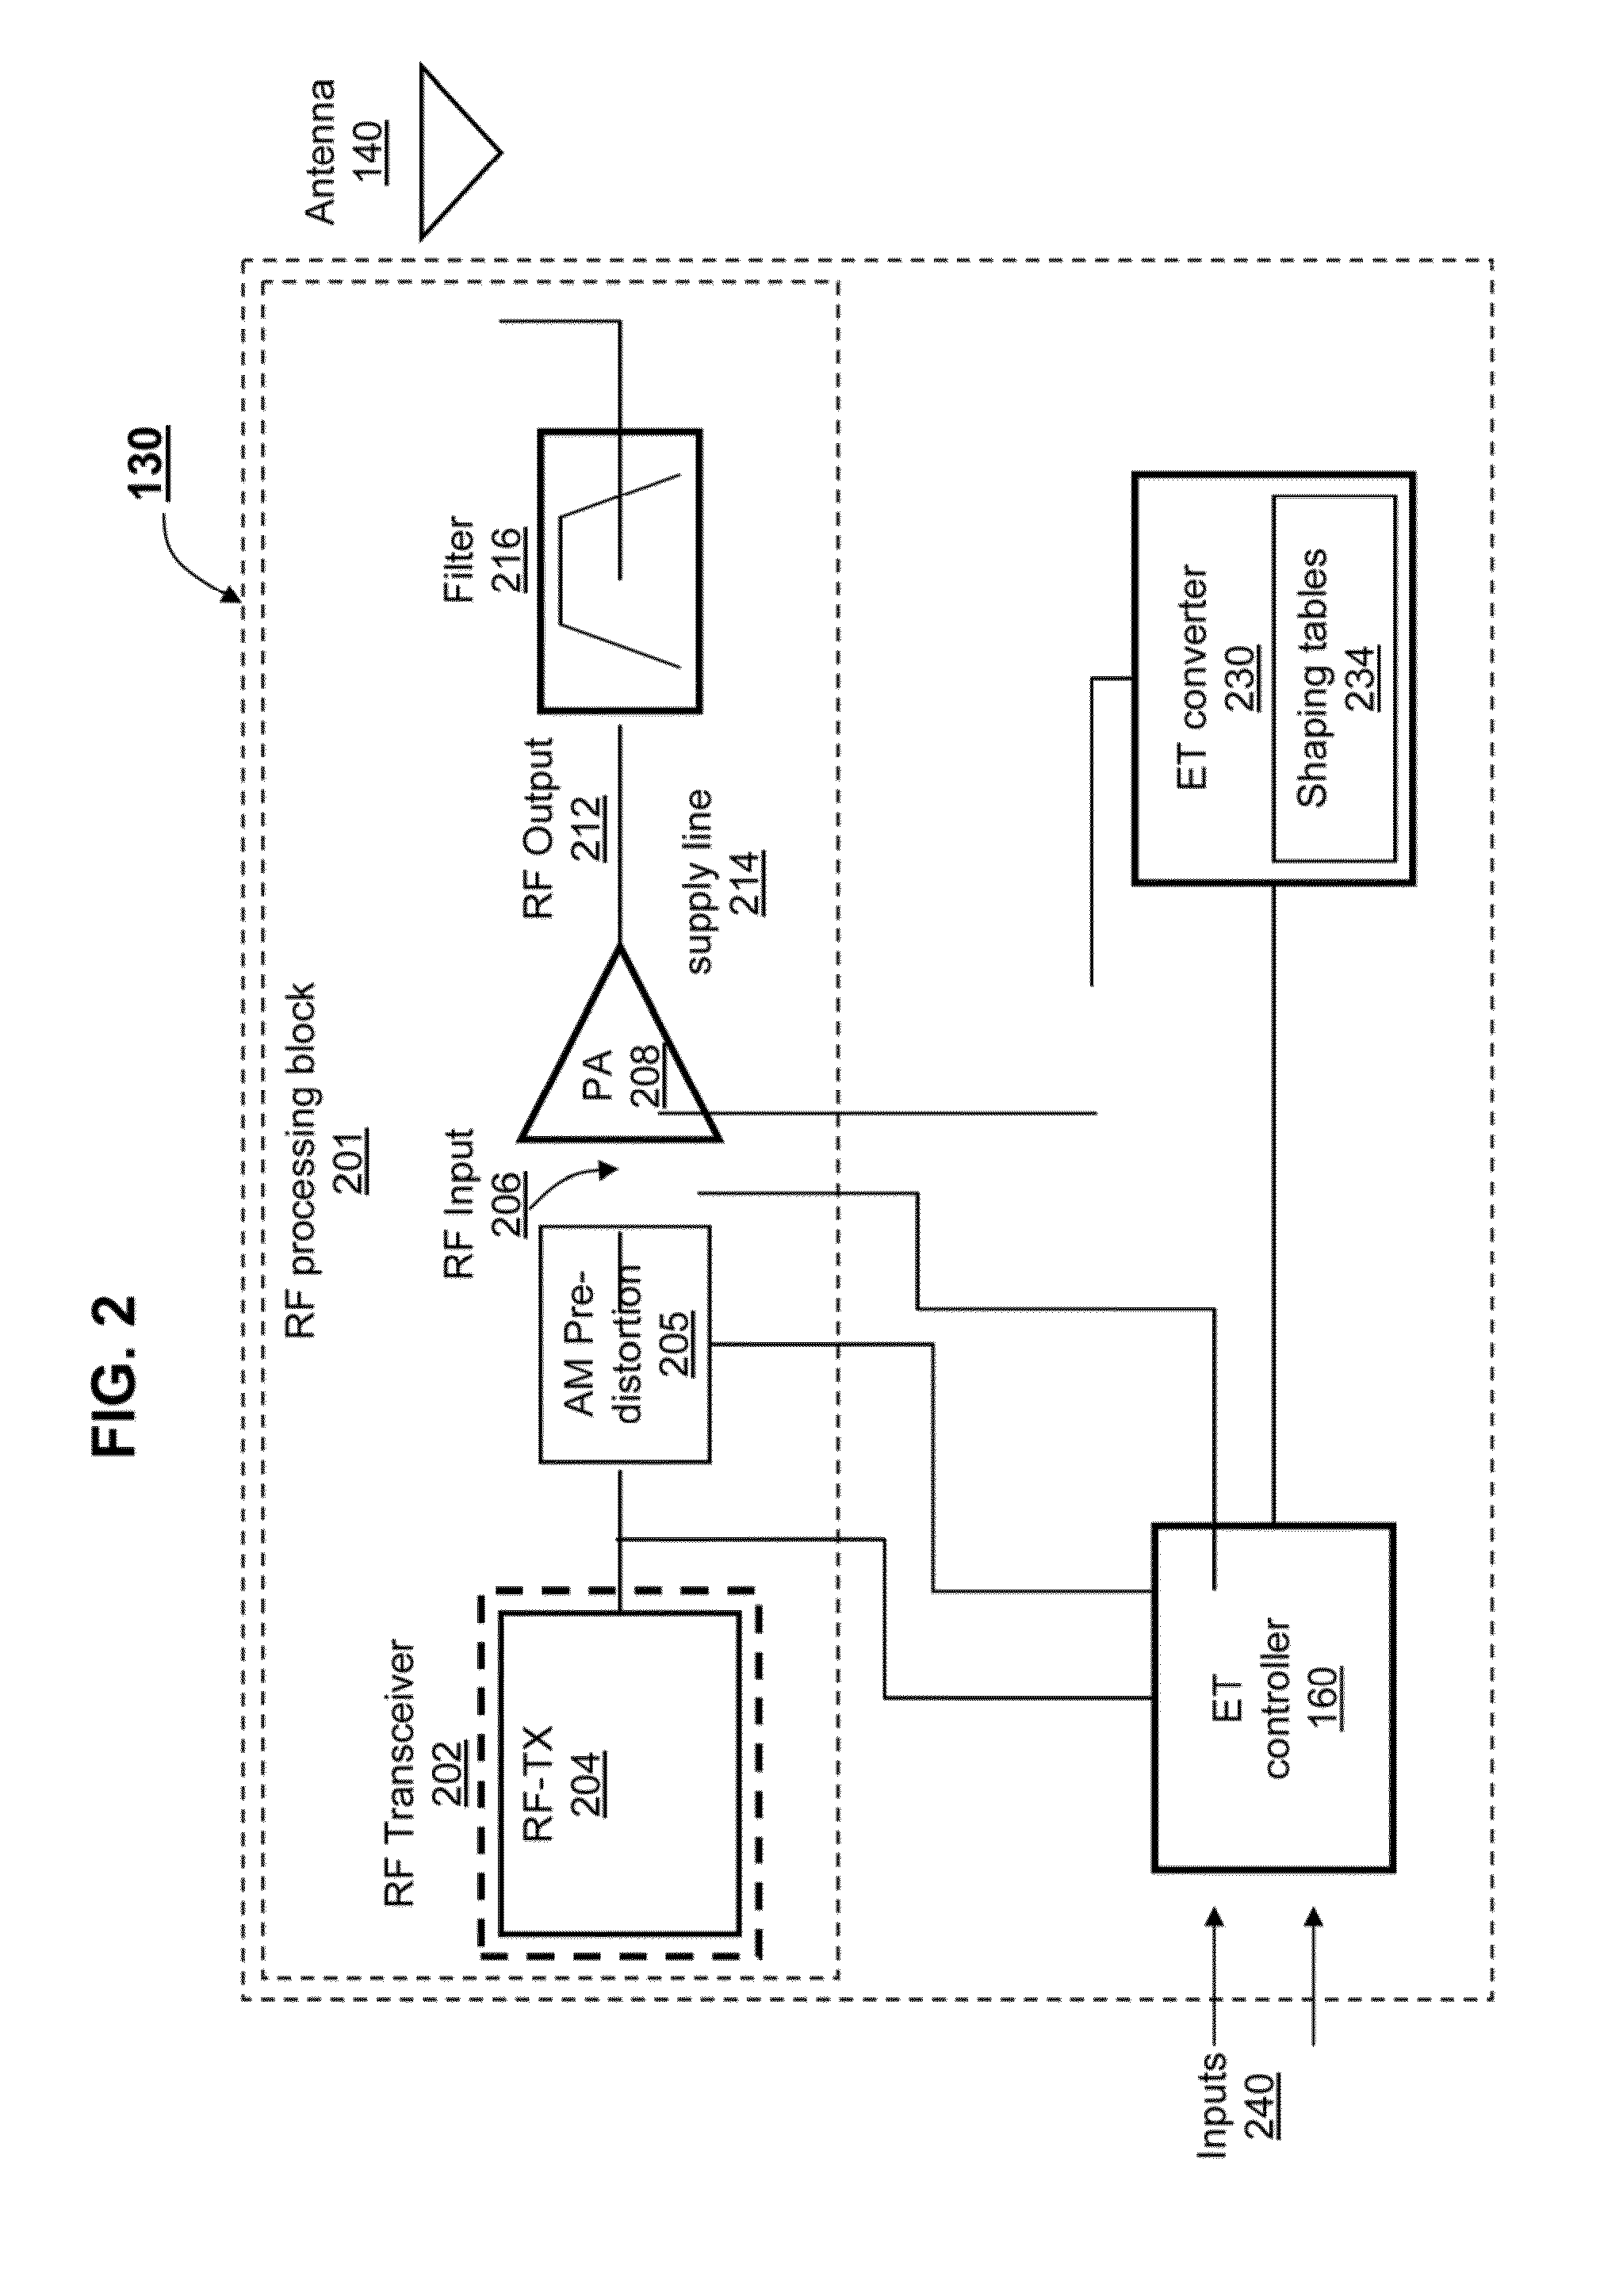 Method for improving tx gain in envelope tracking systems